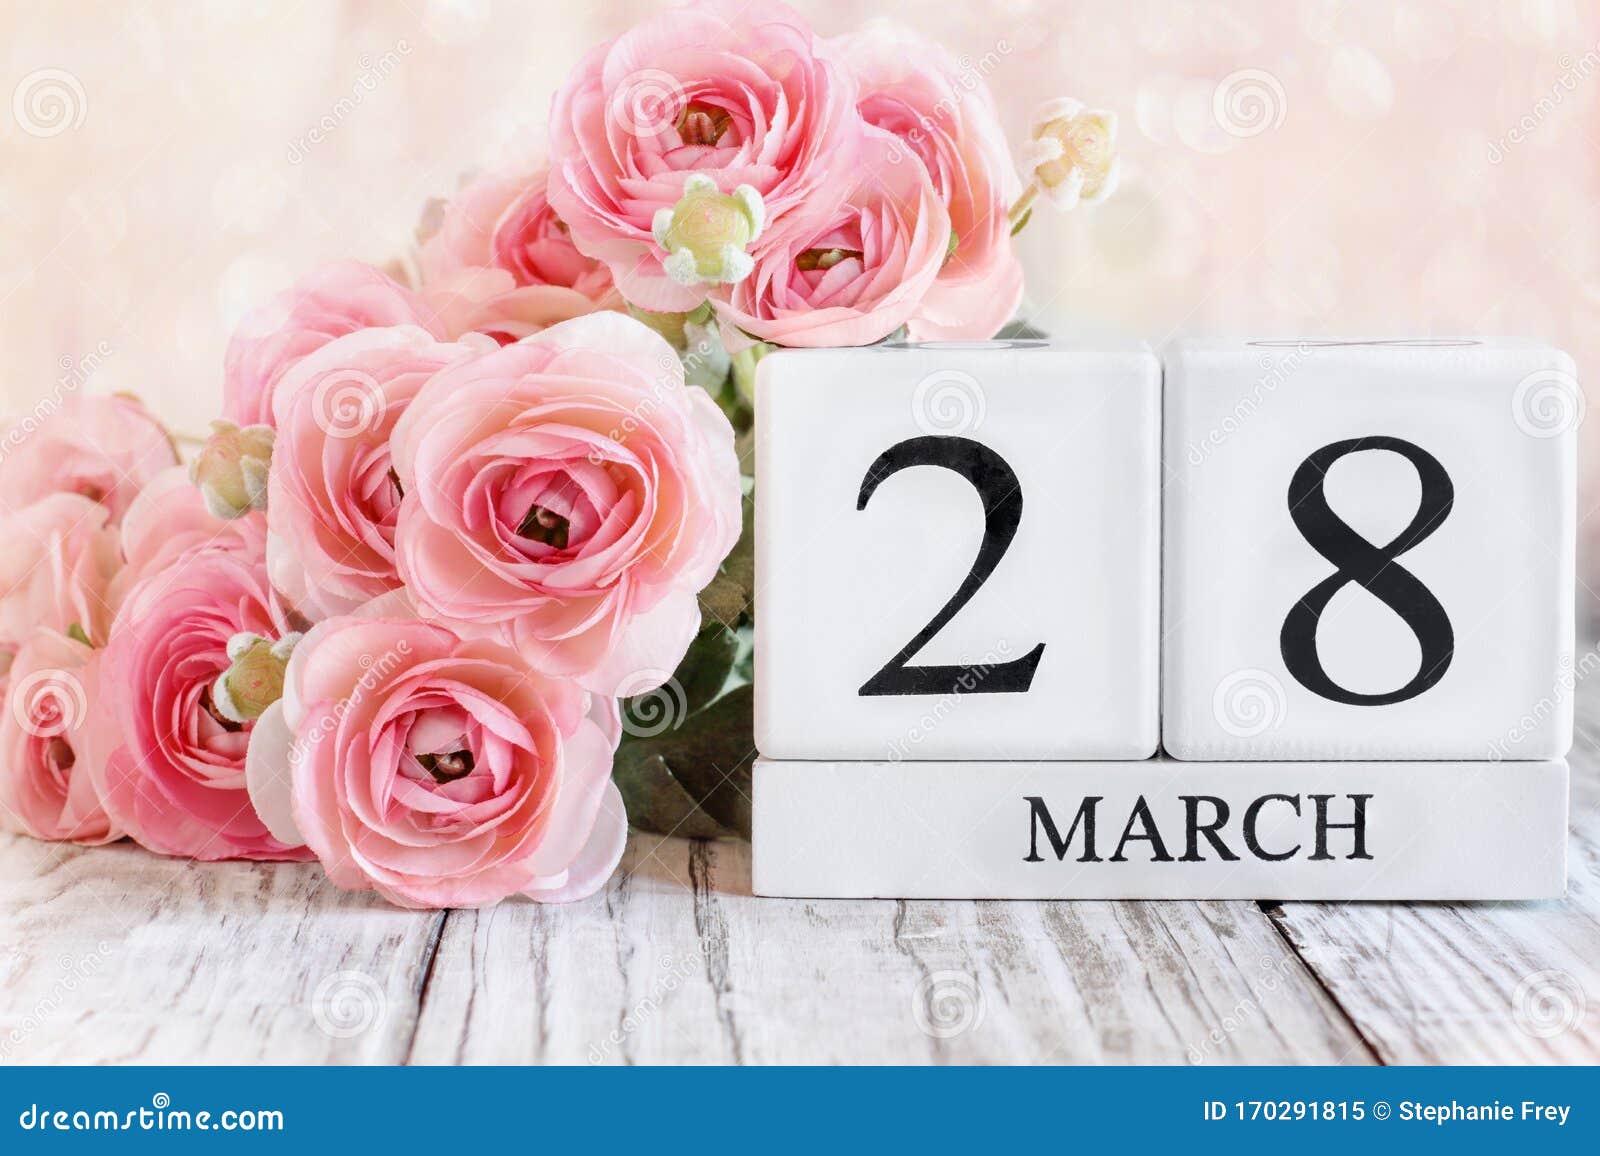 March 28th Calendar Blocks with Pink Ranunculus Stock Image Image of